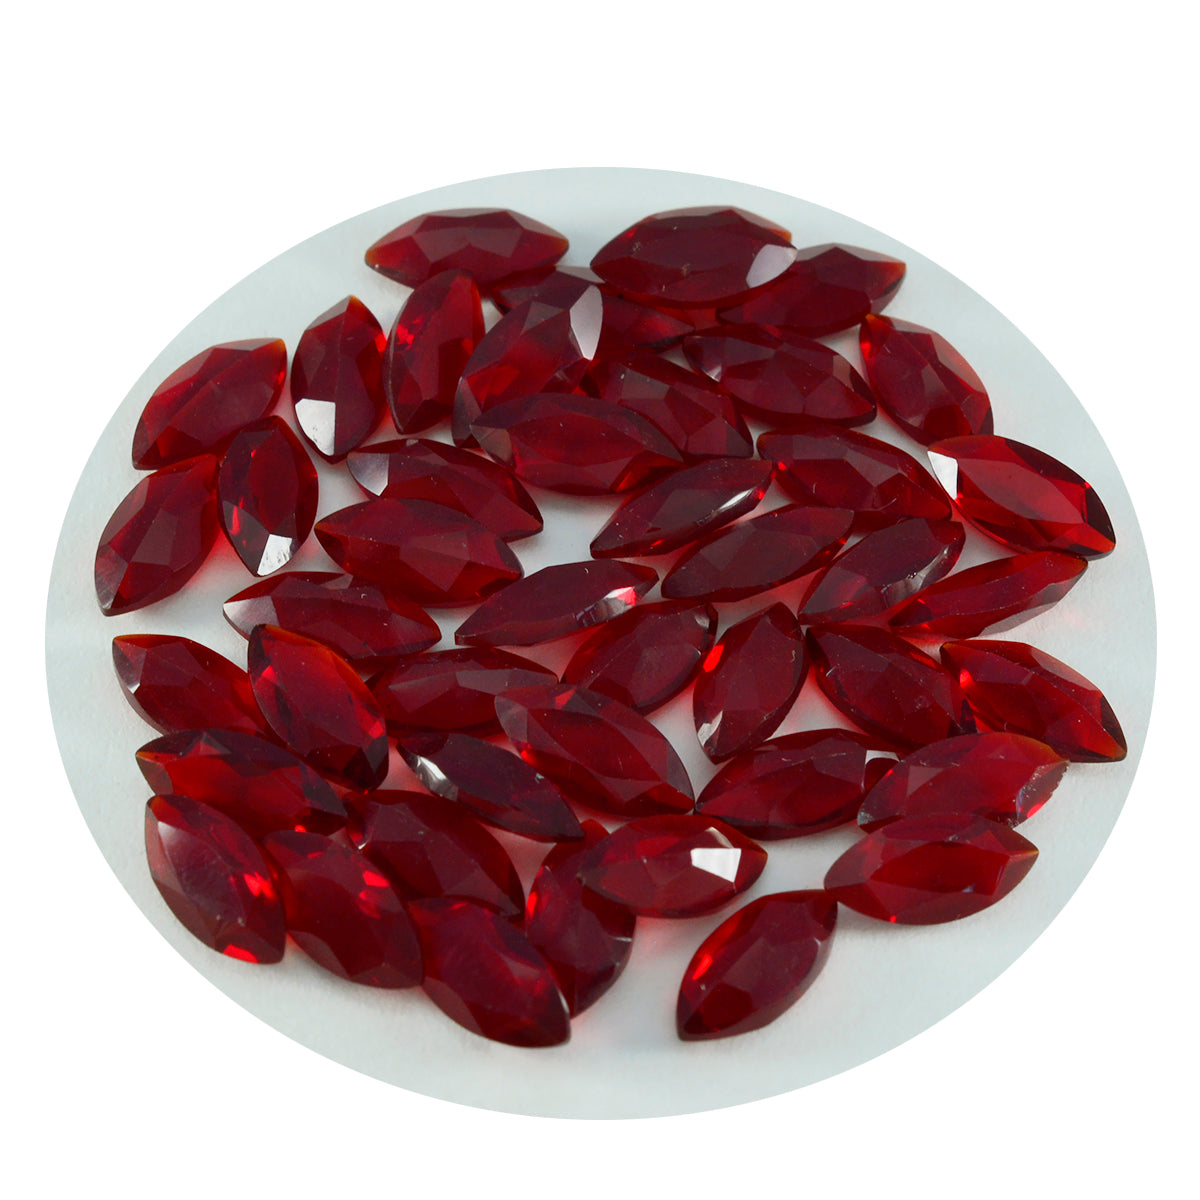 Riyogems 1PC Red Ruby CZ Faceted 2x4 mm Marquise Shape A+1 Quality Loose Gems